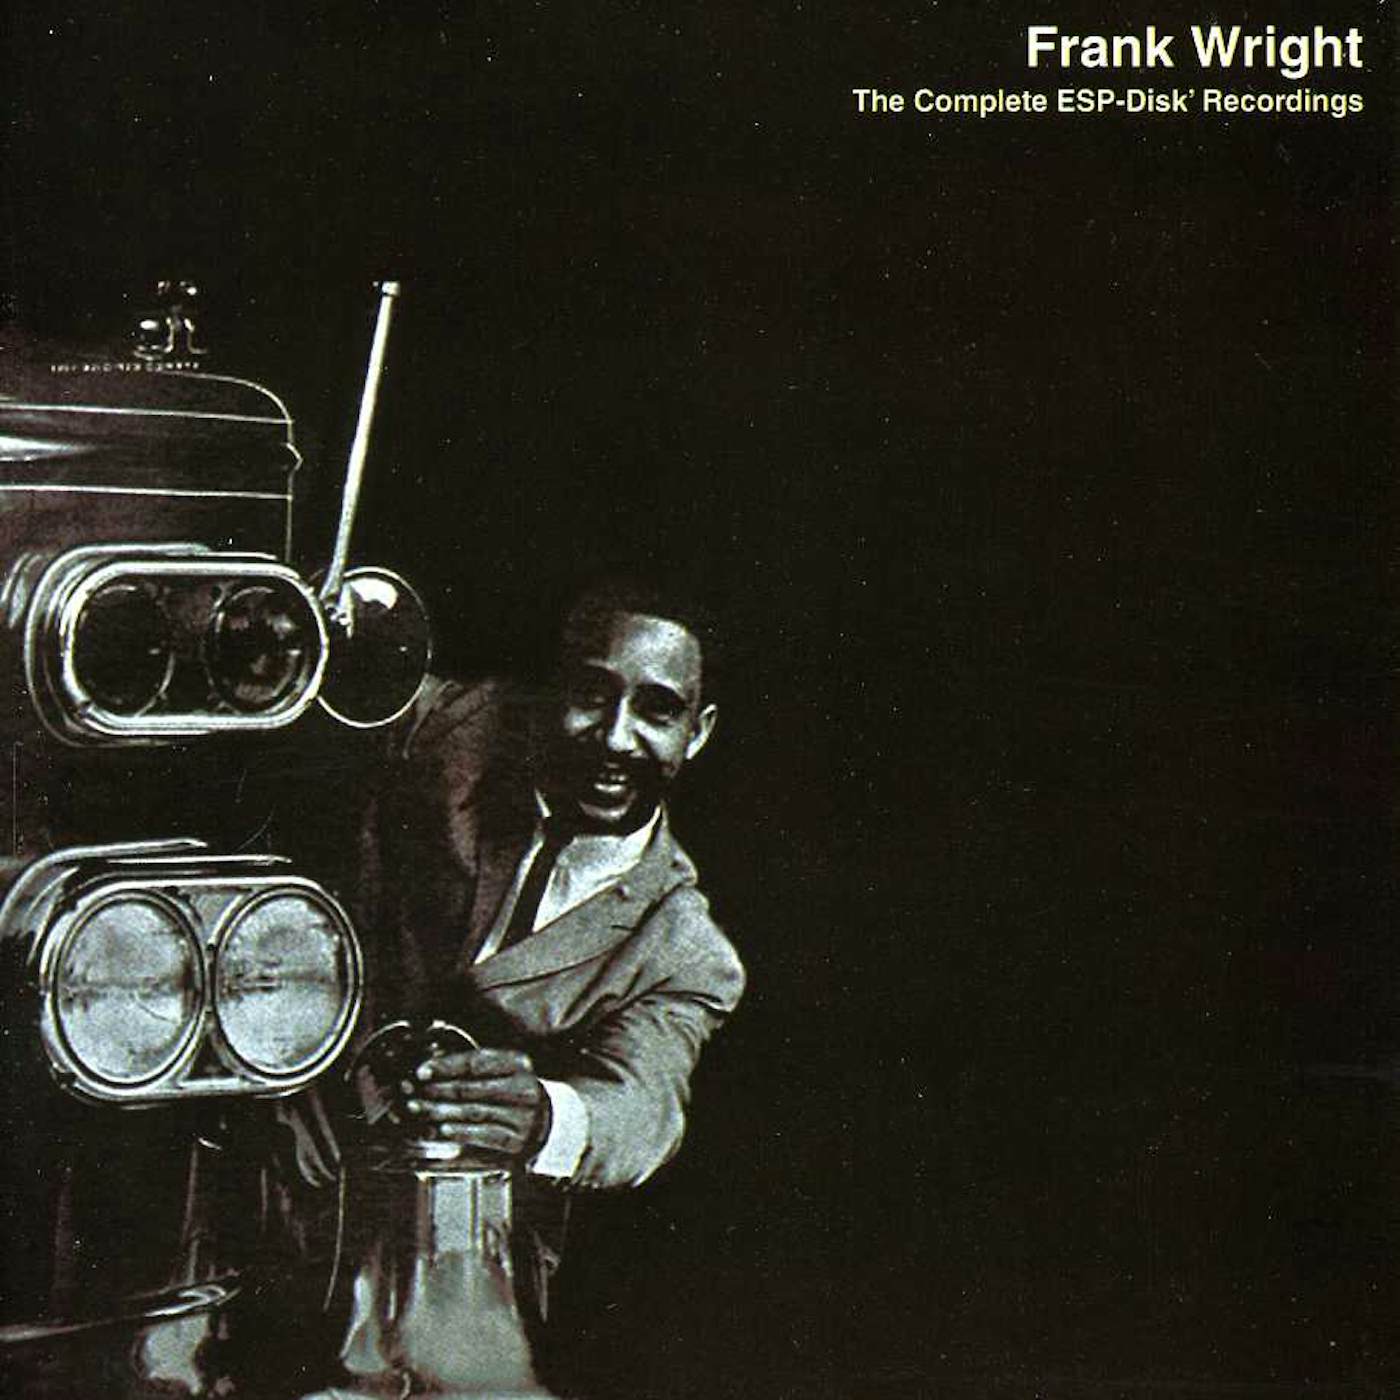 Frank Wright COMPLETE ESP-DISK RECORDINGS CD